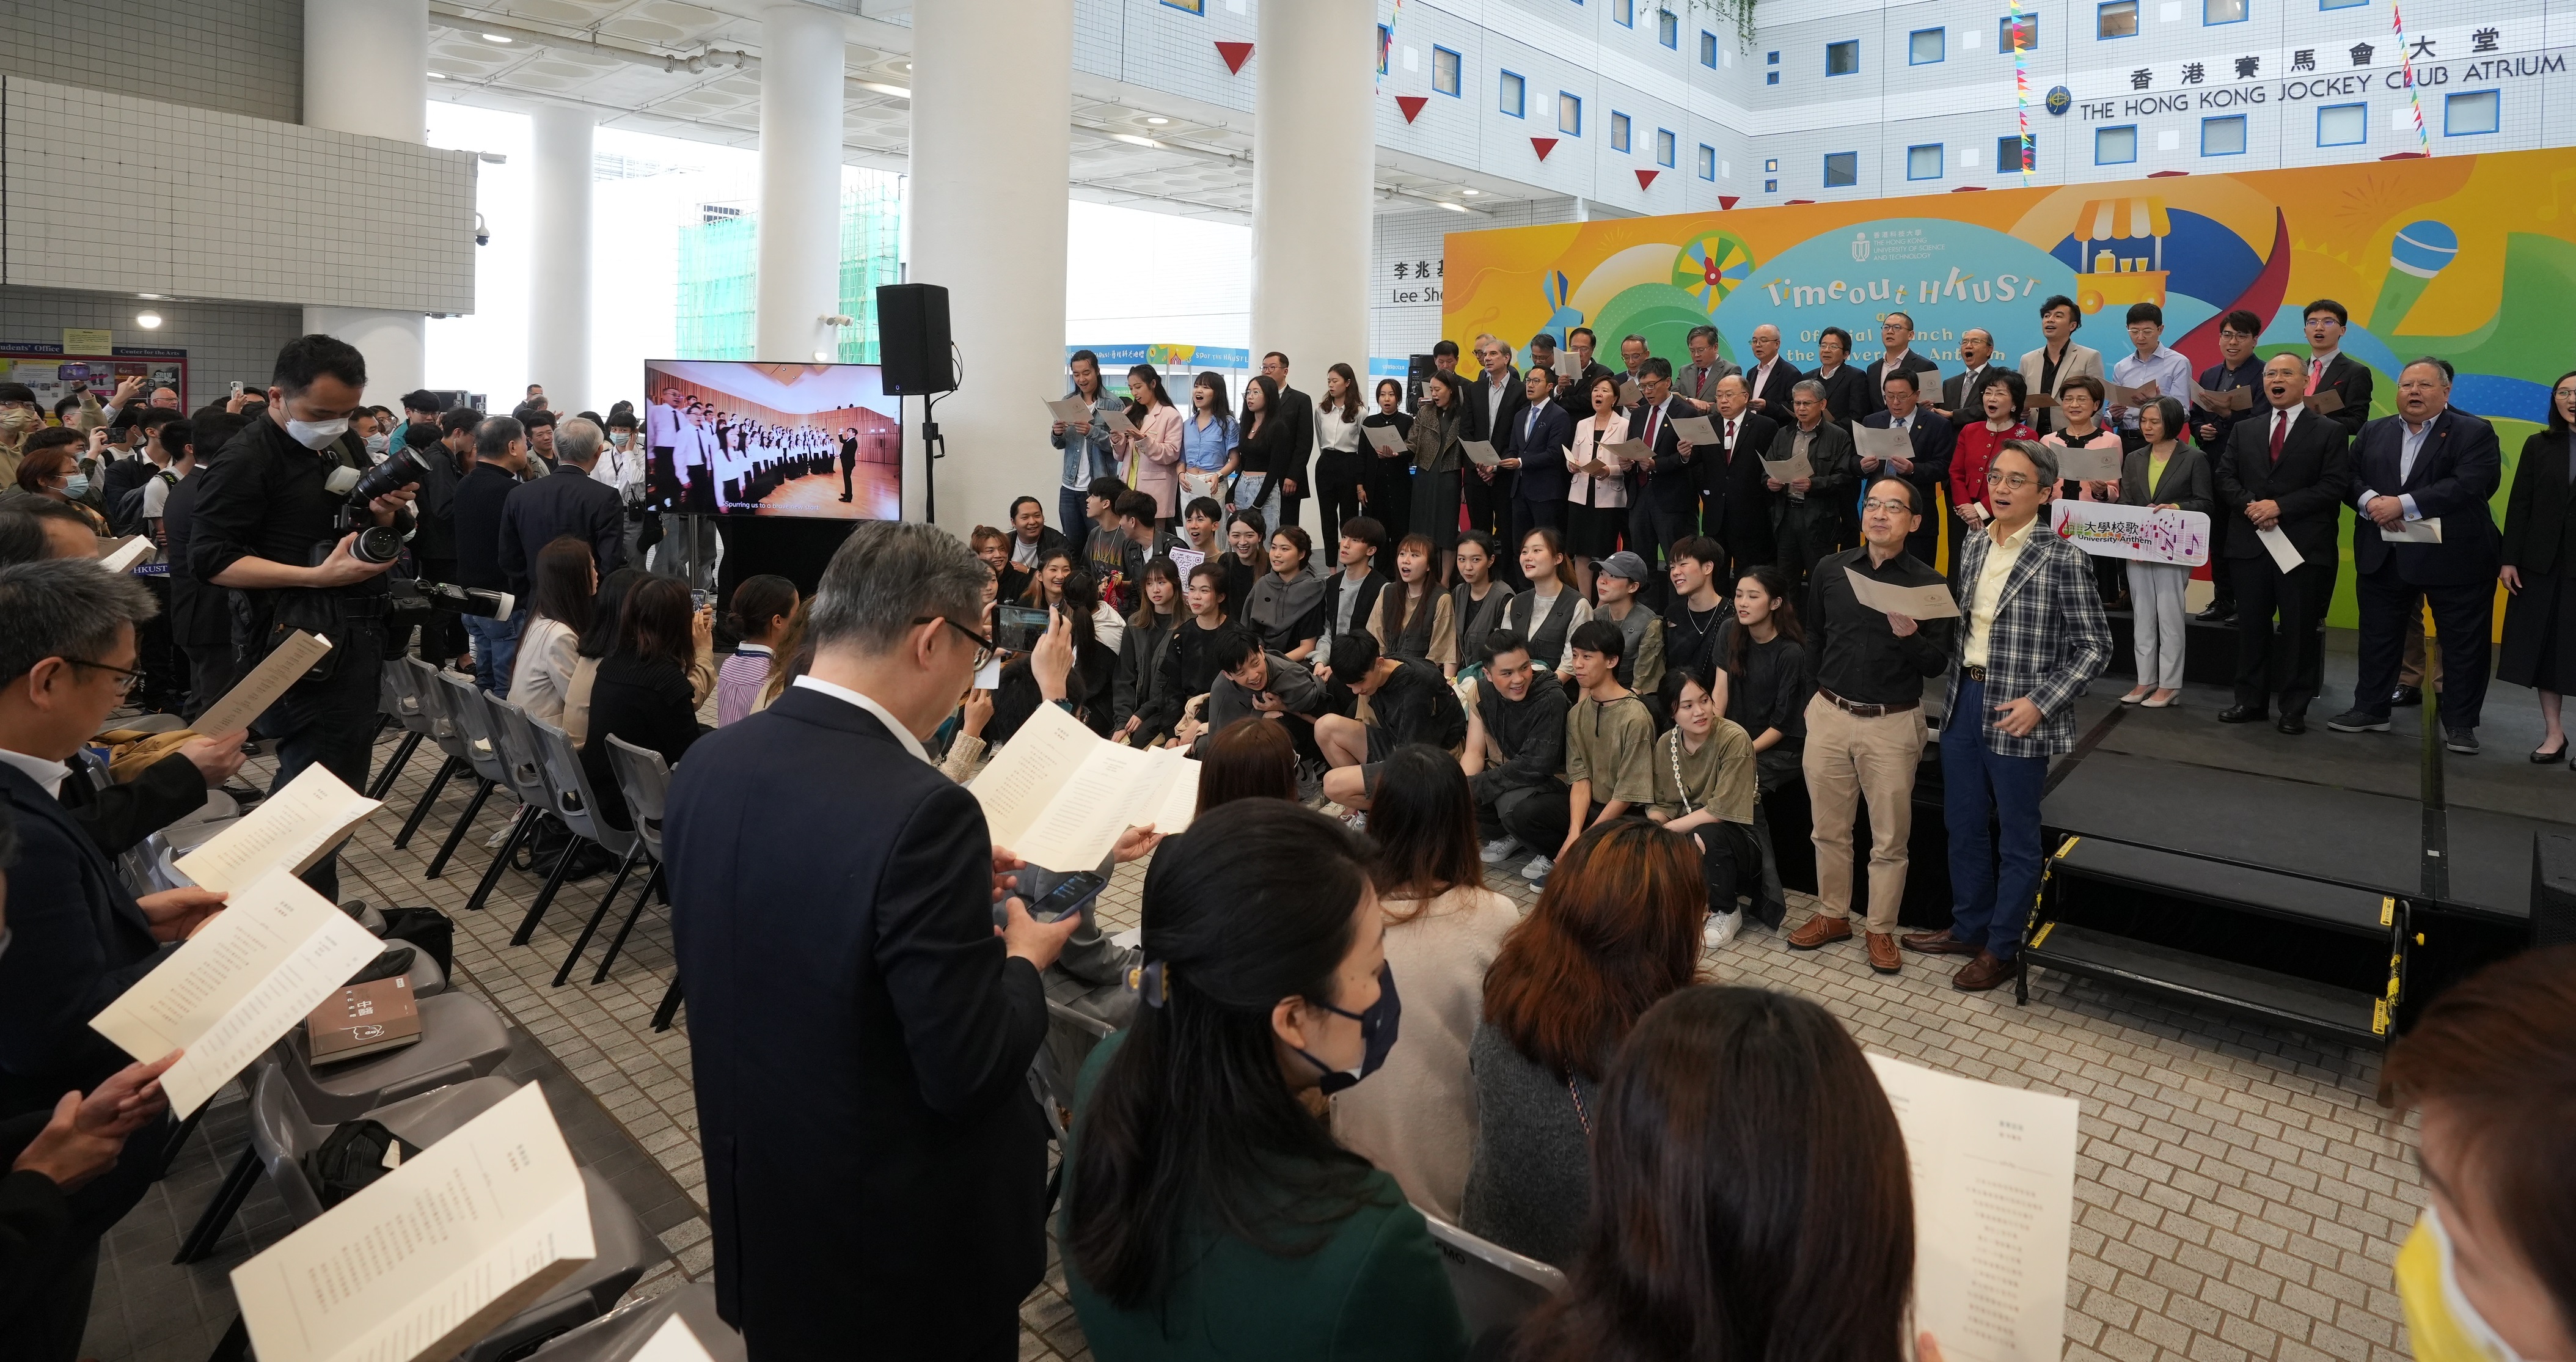 Hundreds of HKUST senior management, students, faculty and staff join HKUST vocalists in signing the university anthem following its debut